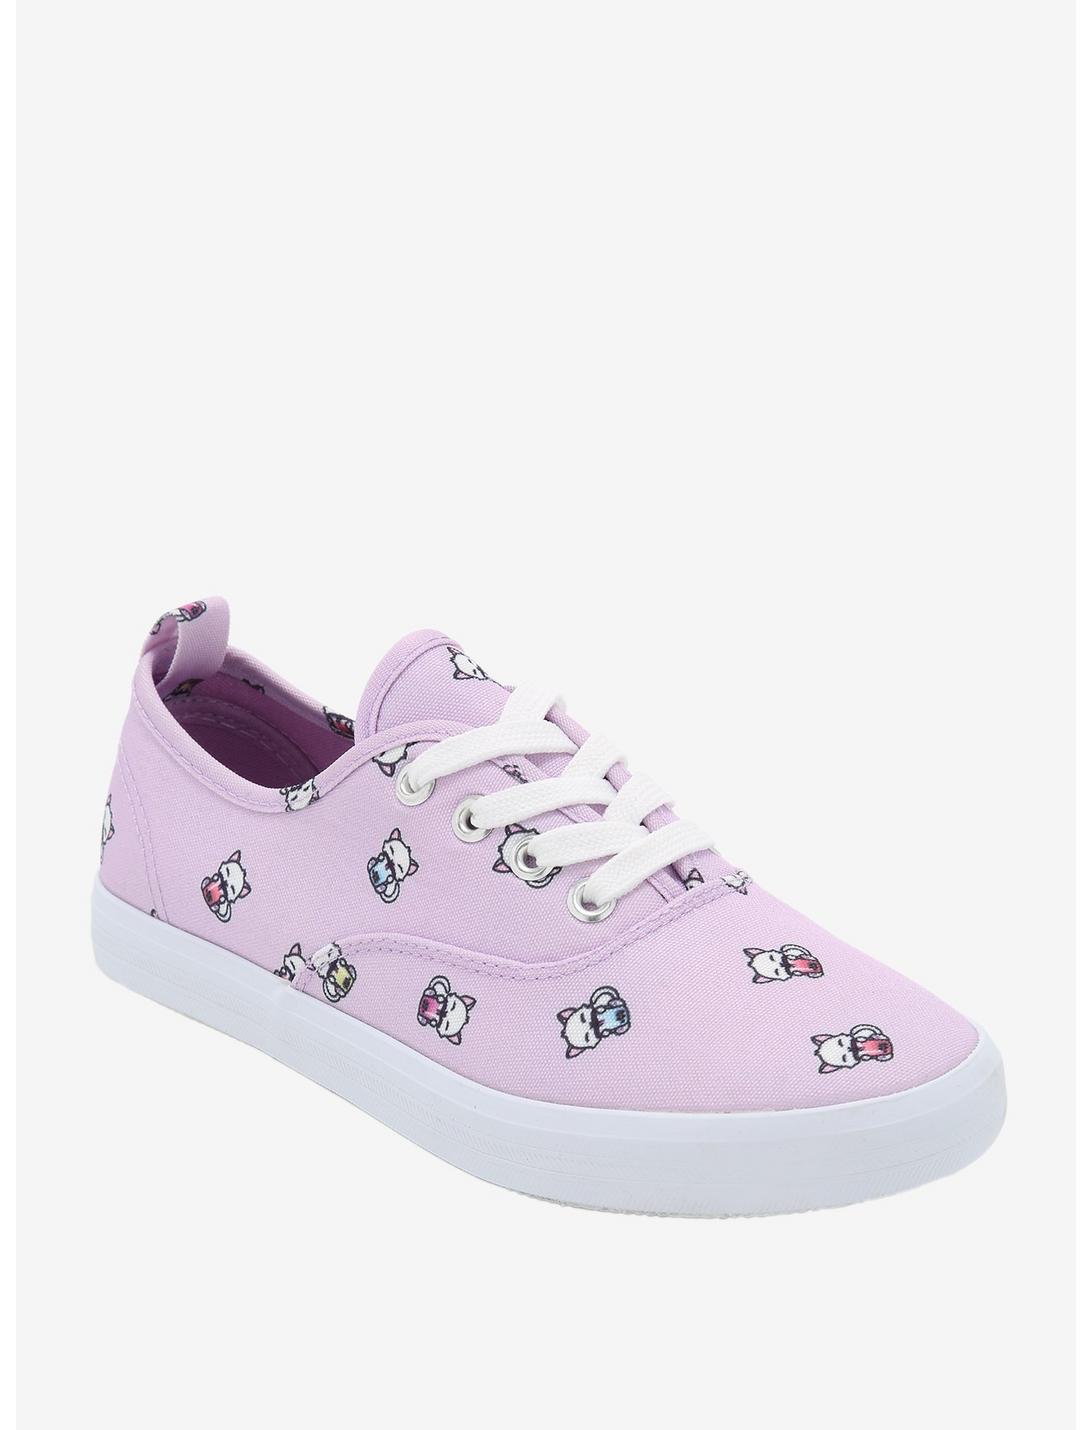 Boba Cats Lilac Lace-Up Sneakers, MULTI, hi-res